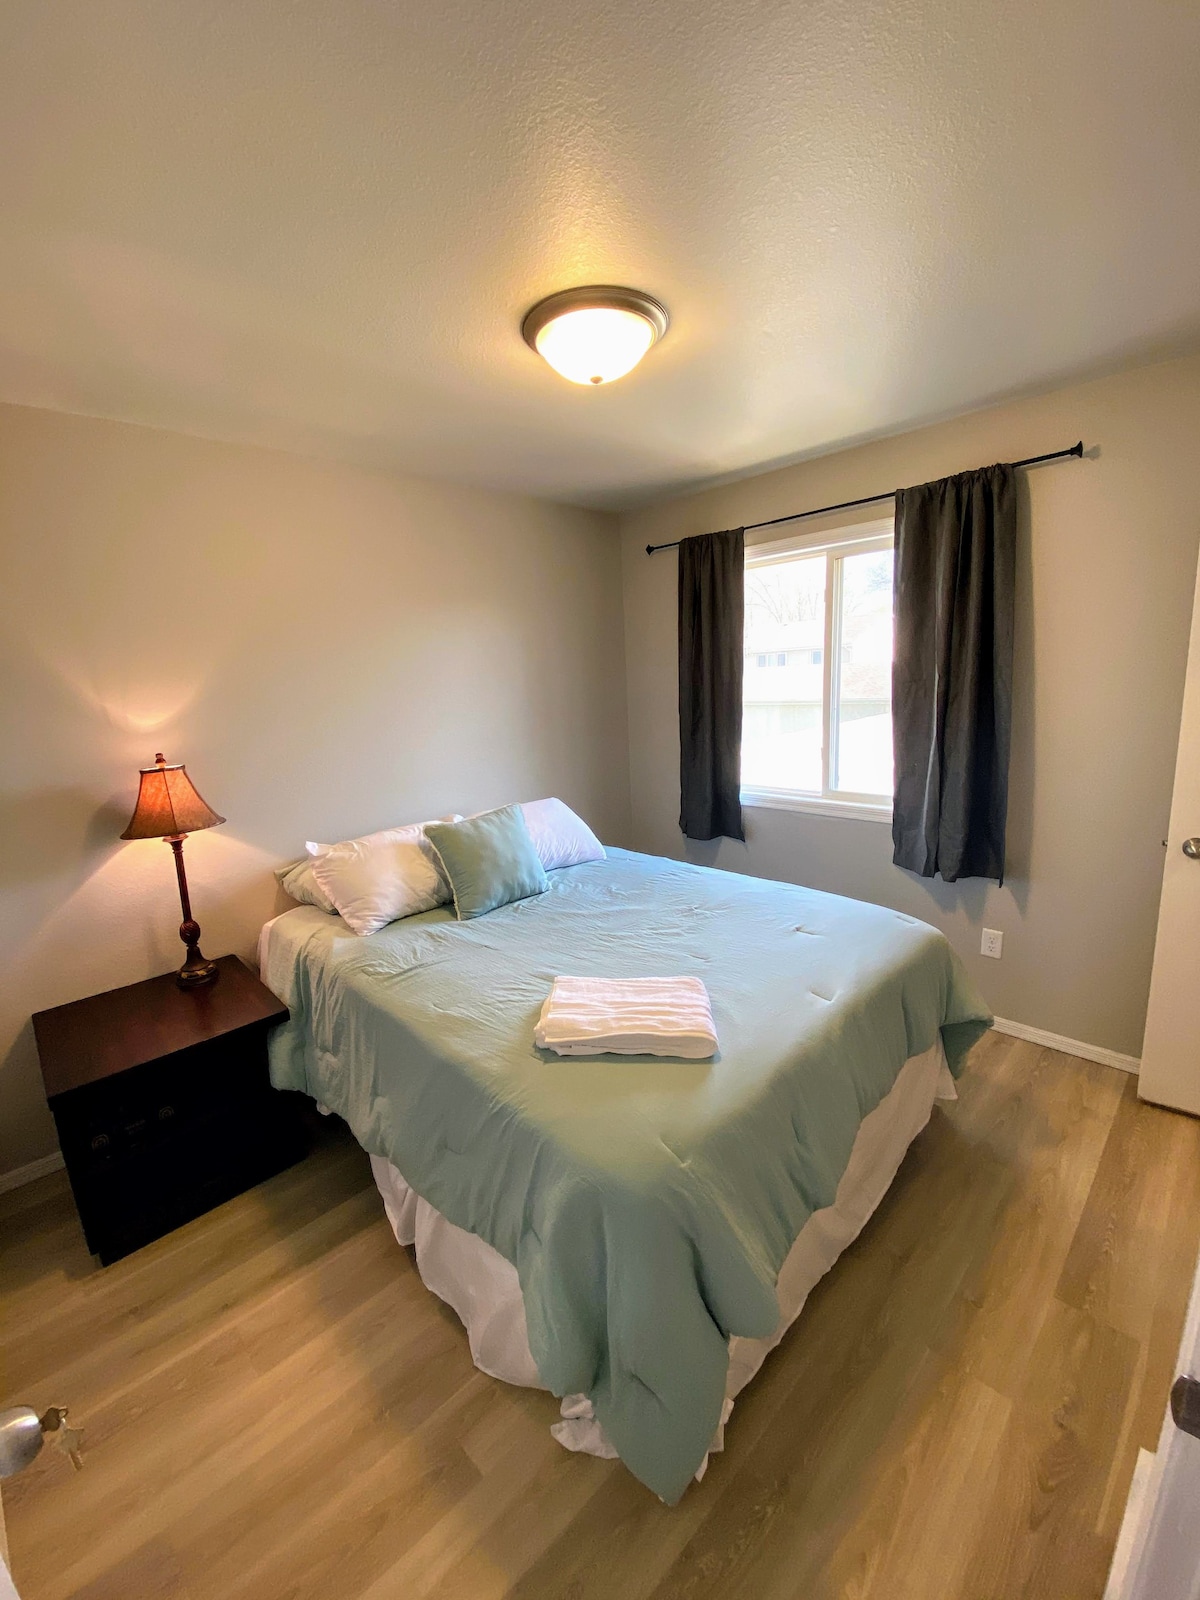 Private Bedroom 2: <7 min from local hospitals